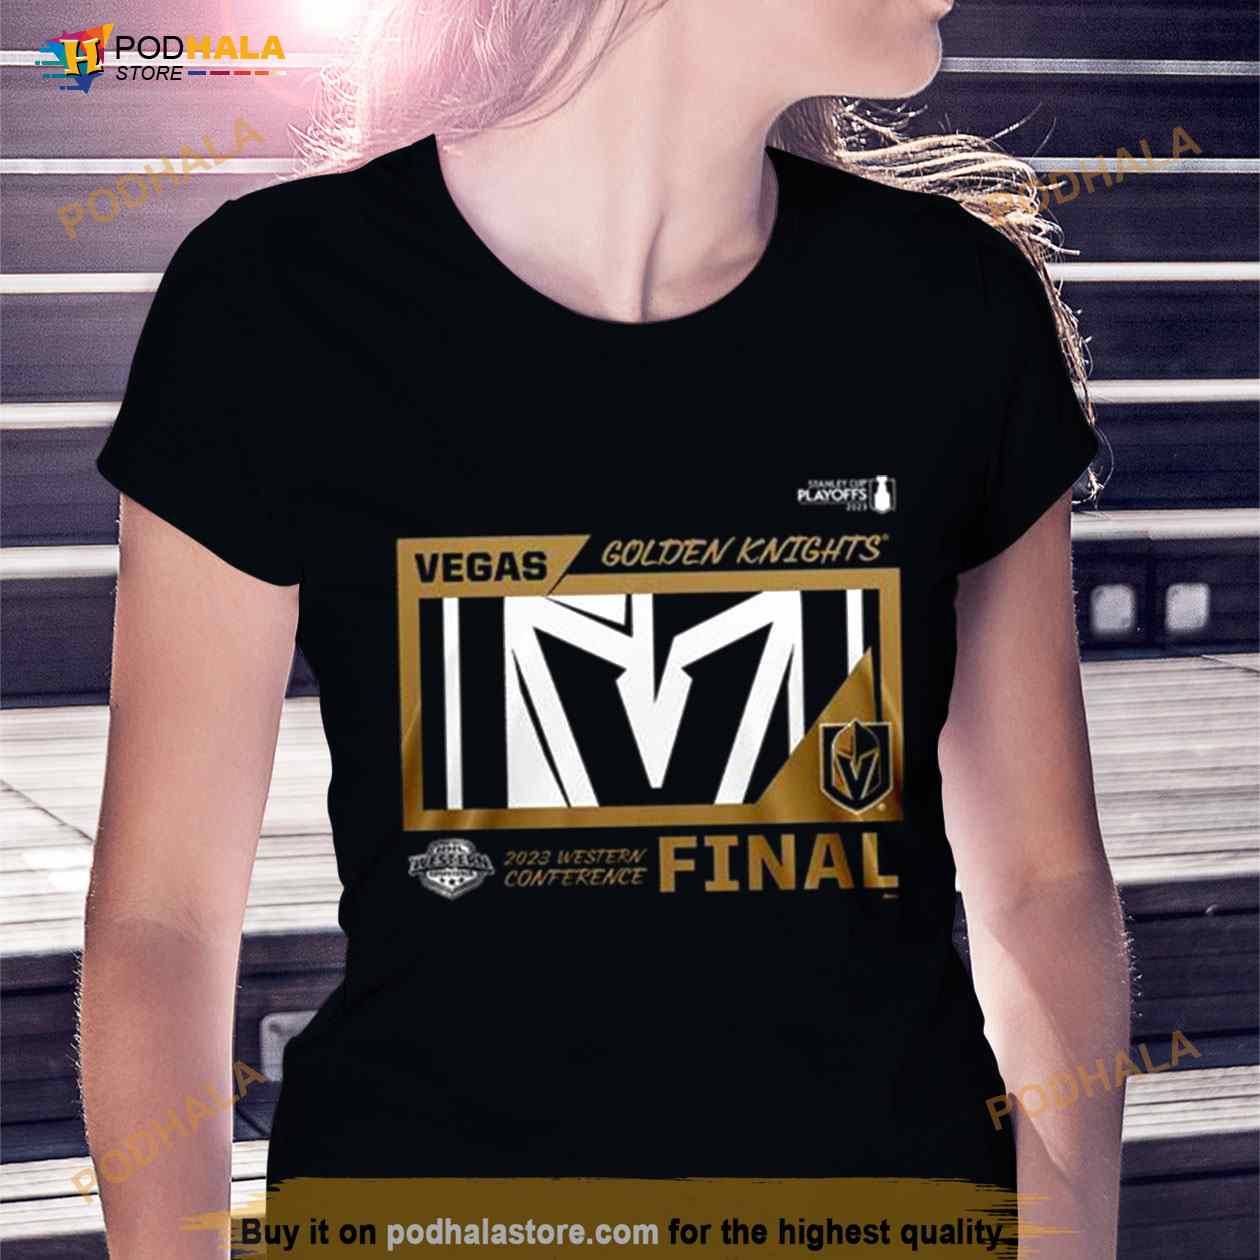 Vegas Golden Knights Playoffs Apparel, Knights Conference Finals